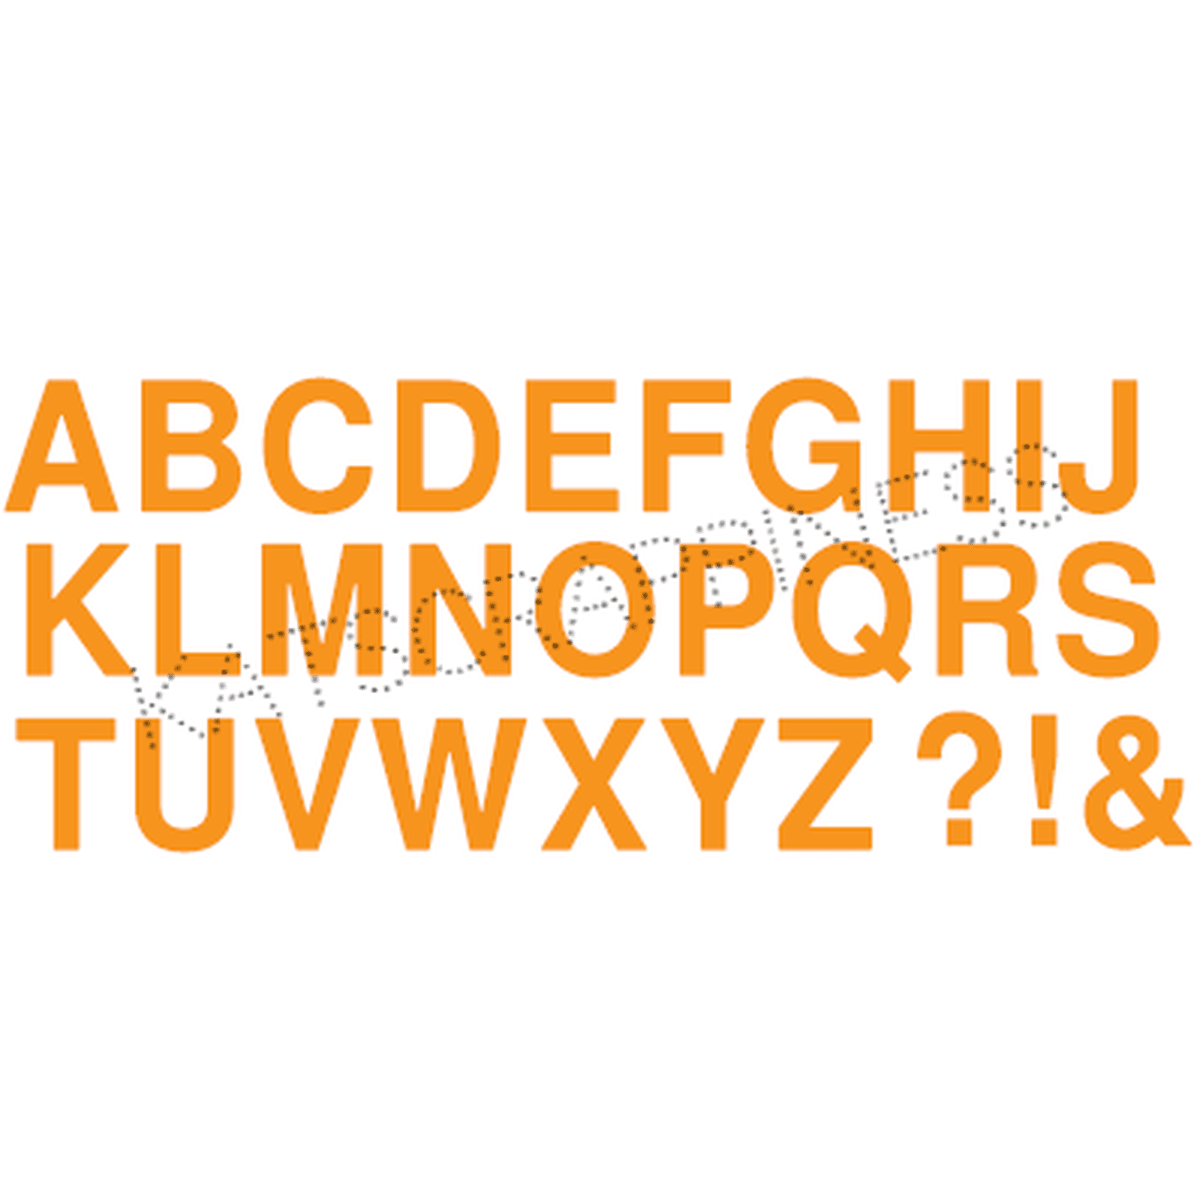 Large Alphabet Dies by Kat Scrappiness - Kat Scrappiness